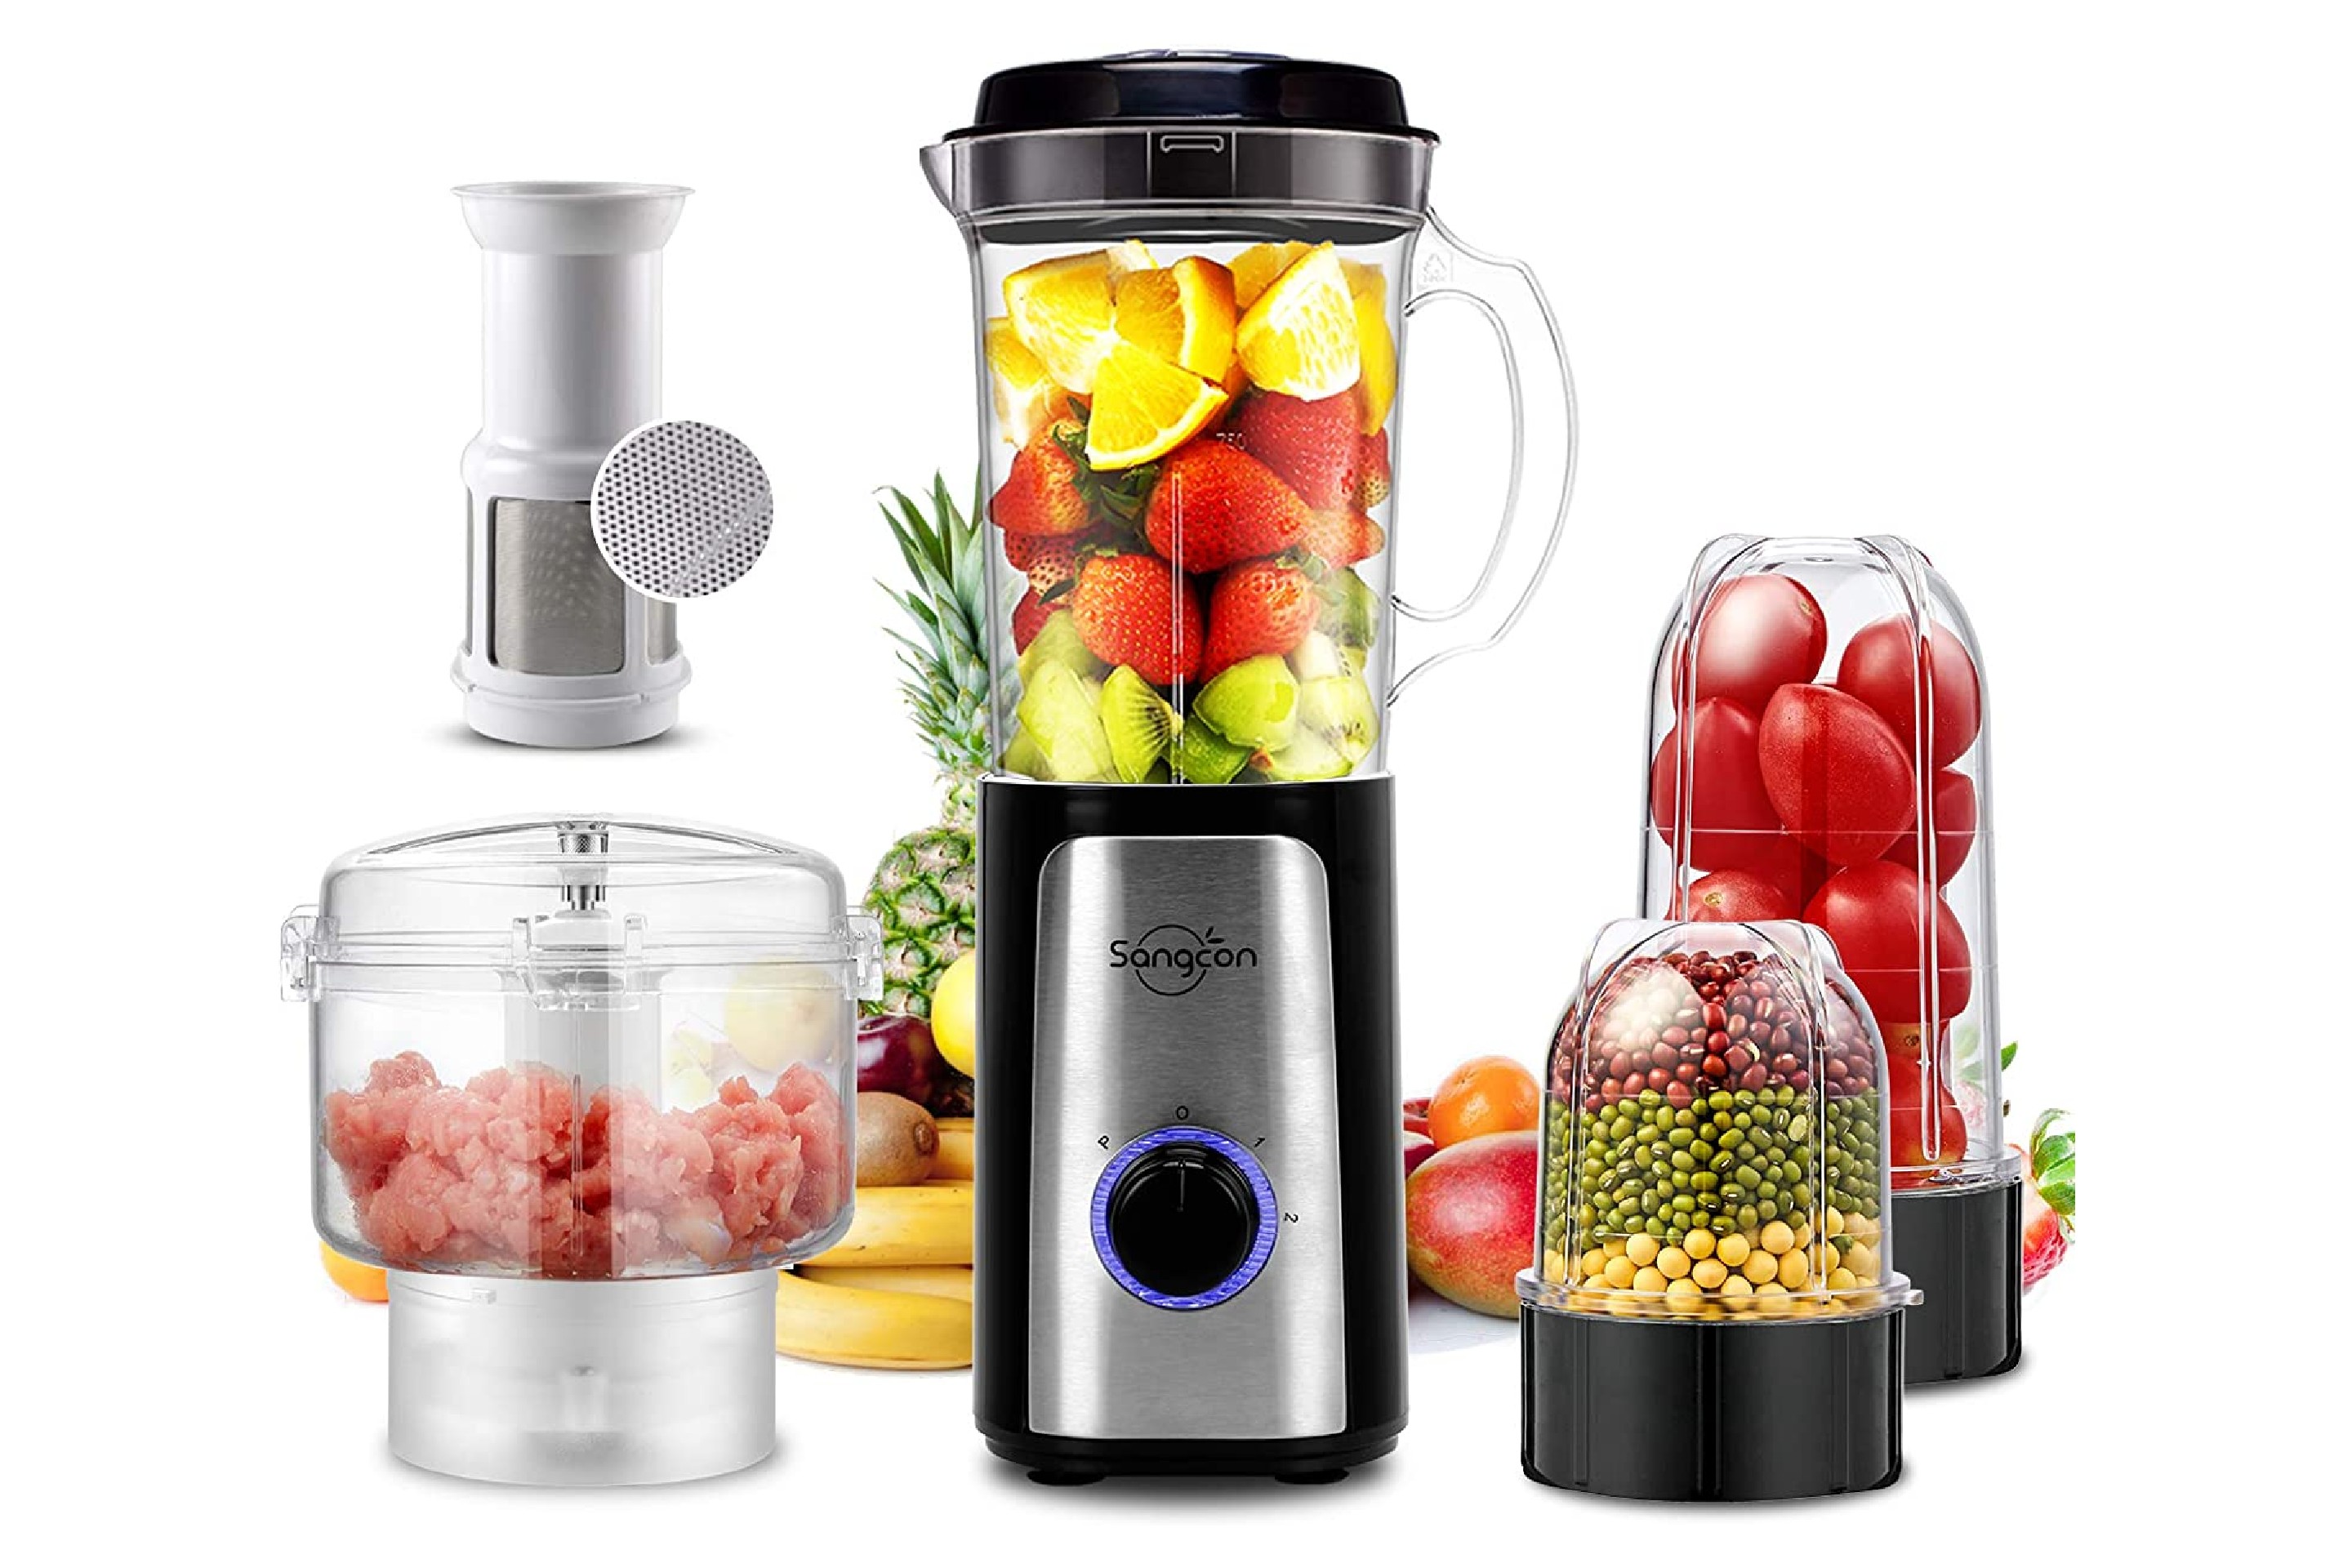 Replace Your Food Processor With This Discounted 3-in-1 Blender On